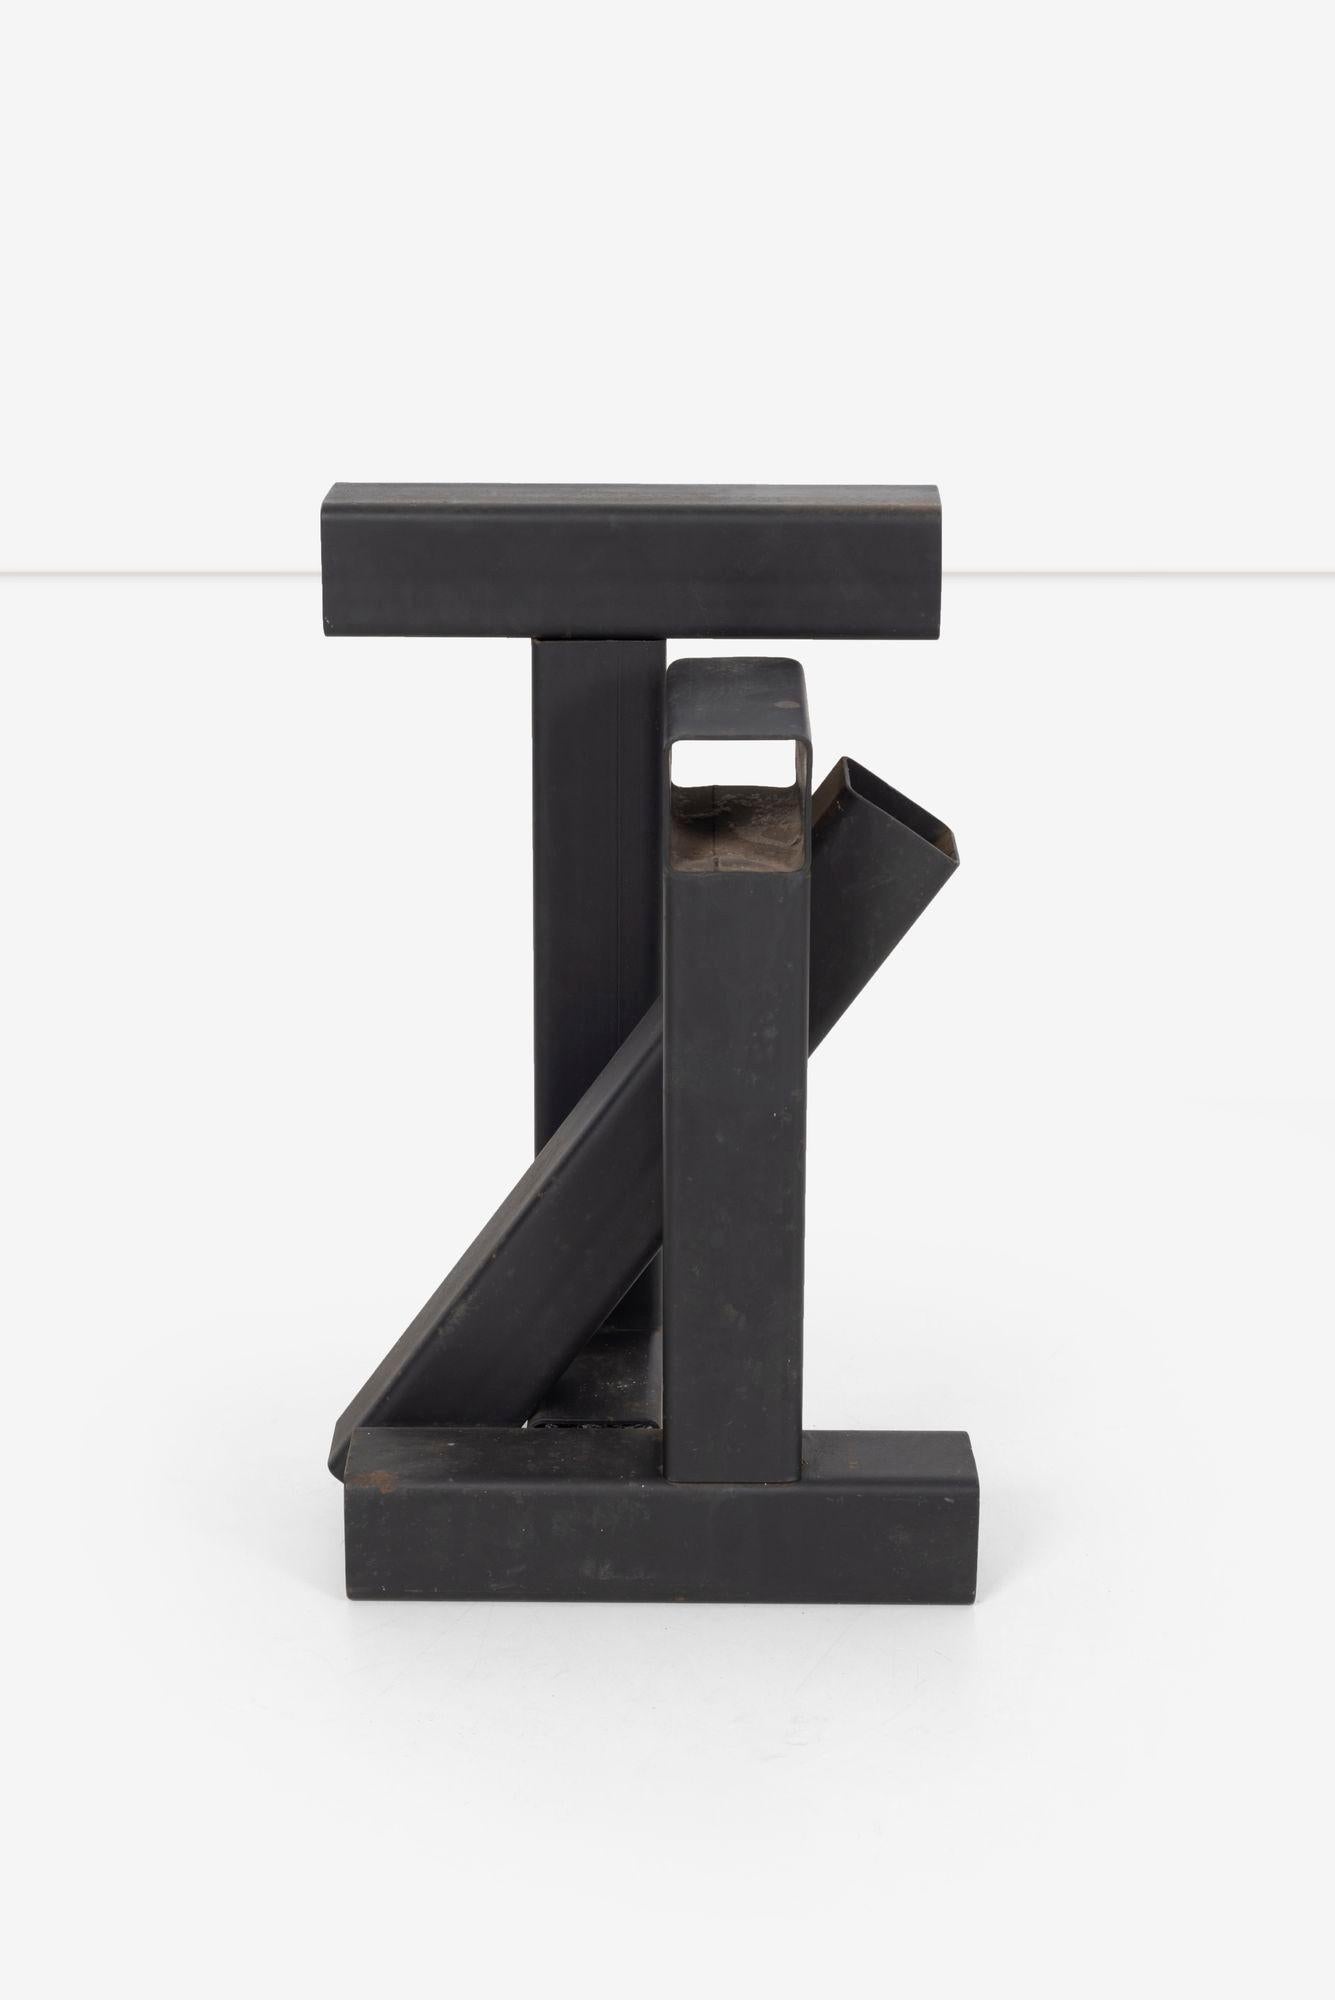 Tony Rosenthal Maquette for Large T-Square Sculpture In Good Condition For Sale In Chicago, IL